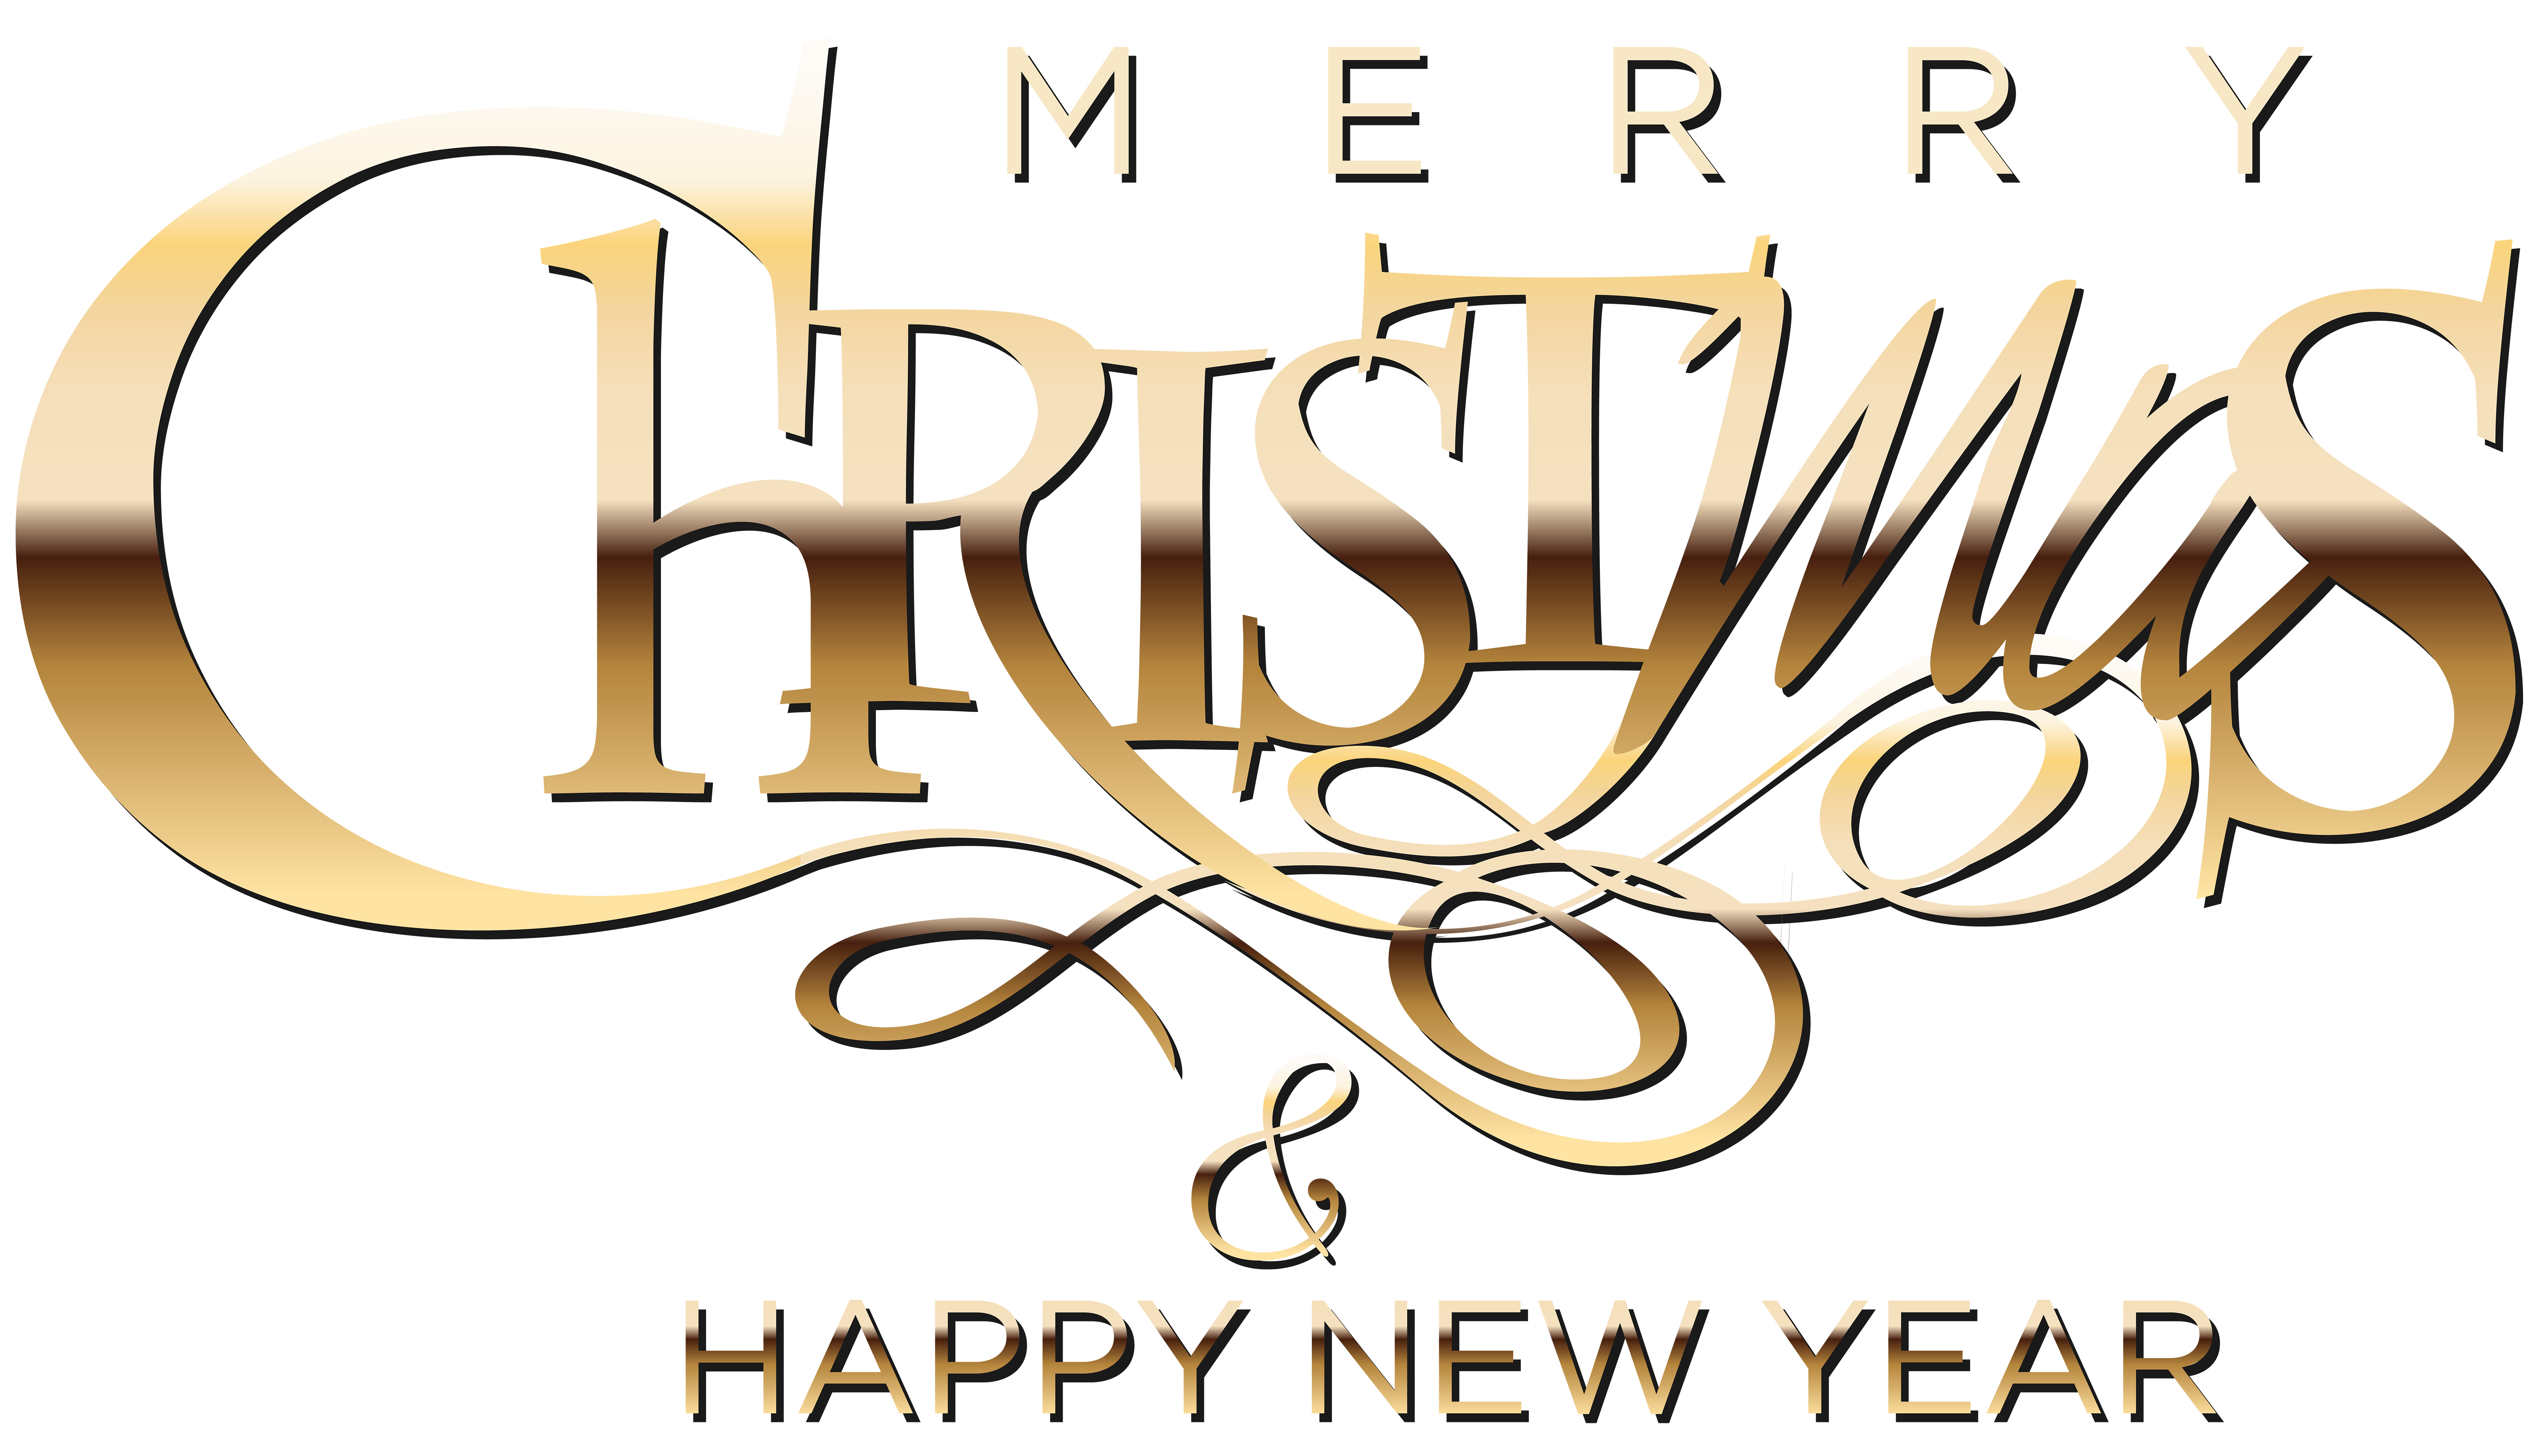 Merry Christmas And Happy New Year Lettering Design Printable